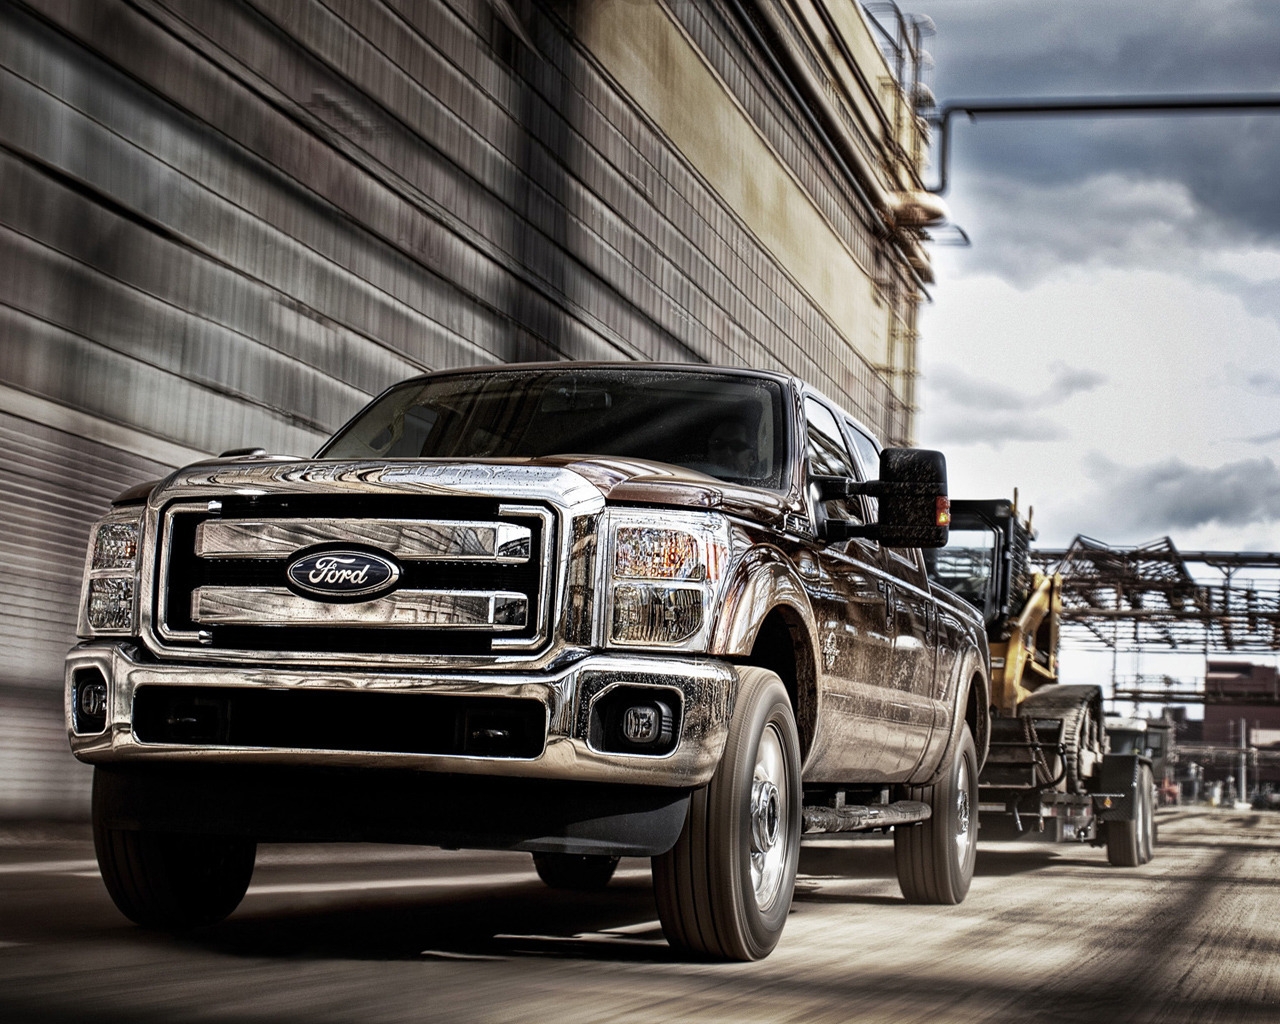 Ford F-Series Super Duty 2011 for 1280 x 1024 resolution